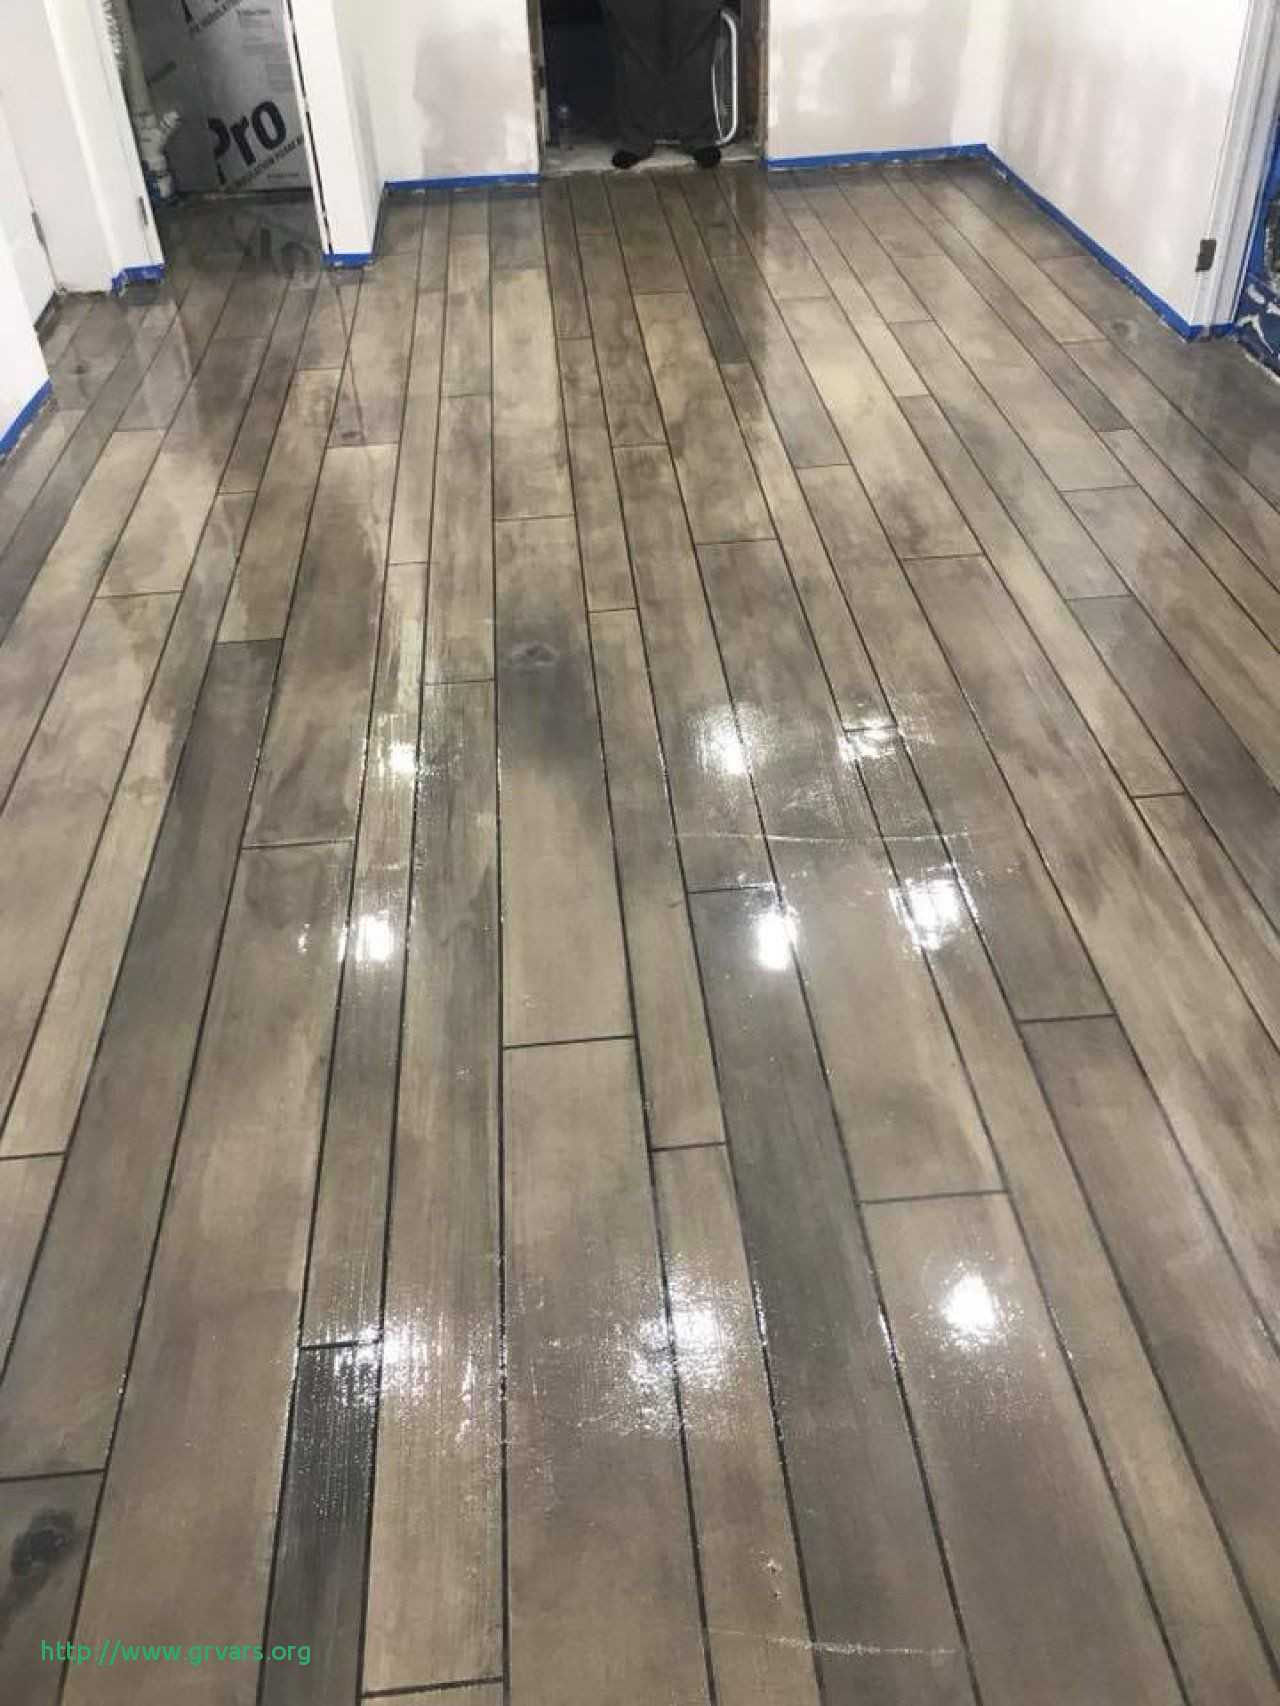 15 Stylish Hardwood Floor Tile Lowes 2023 free download hardwood floor tile lowes of lowes flooring contractors charmant inspirational lowes roofing pertaining to wood look floor tile available at lowe s lowes flooring contractors impressionnant 